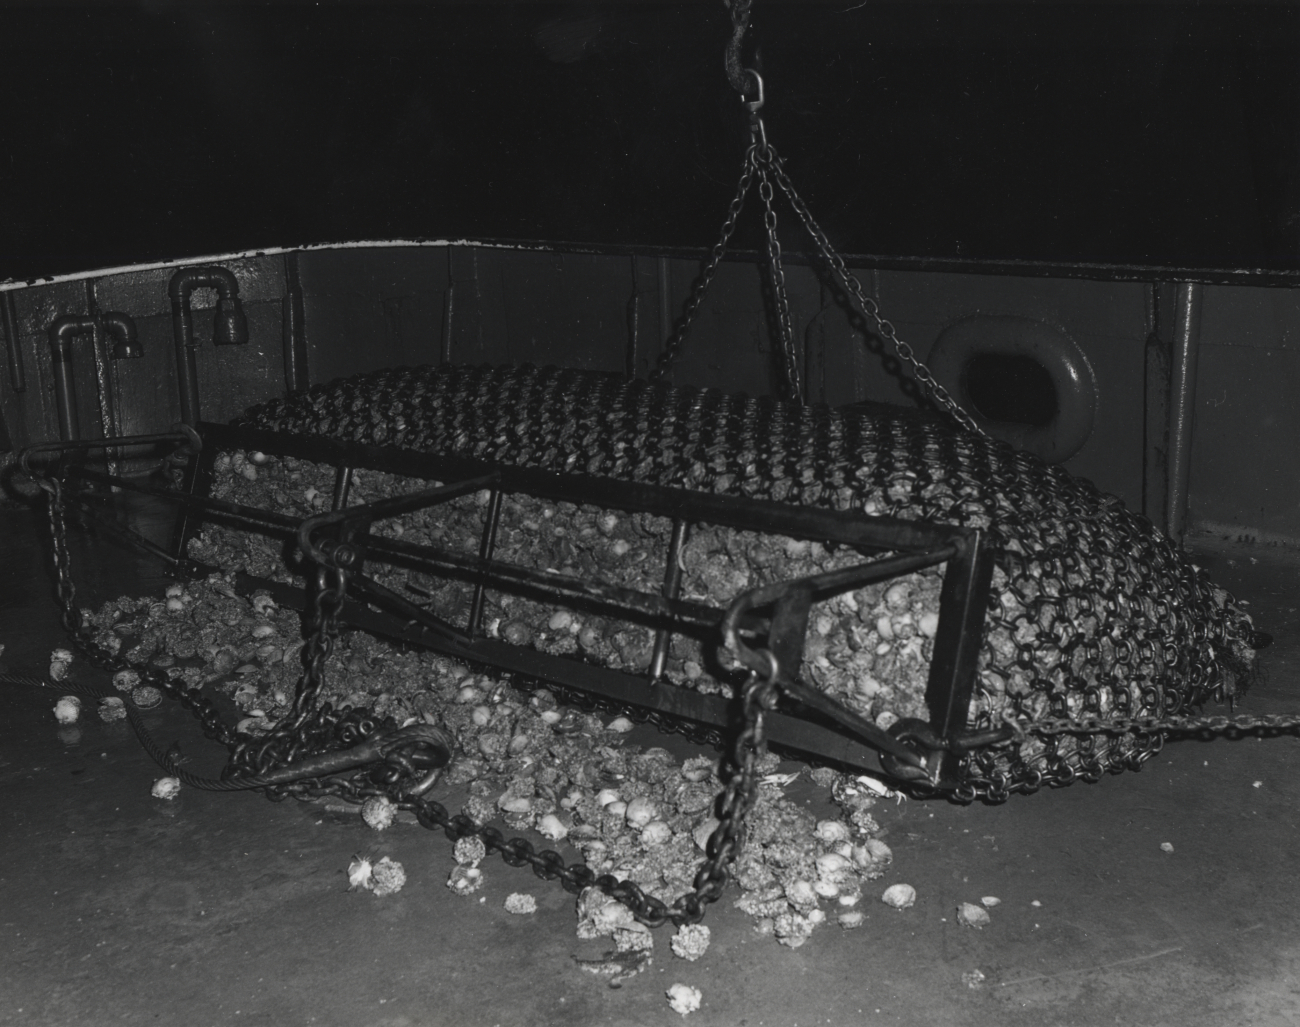 Calico scallops being dumped from a tumbler dredge onto the deck of the OREGON